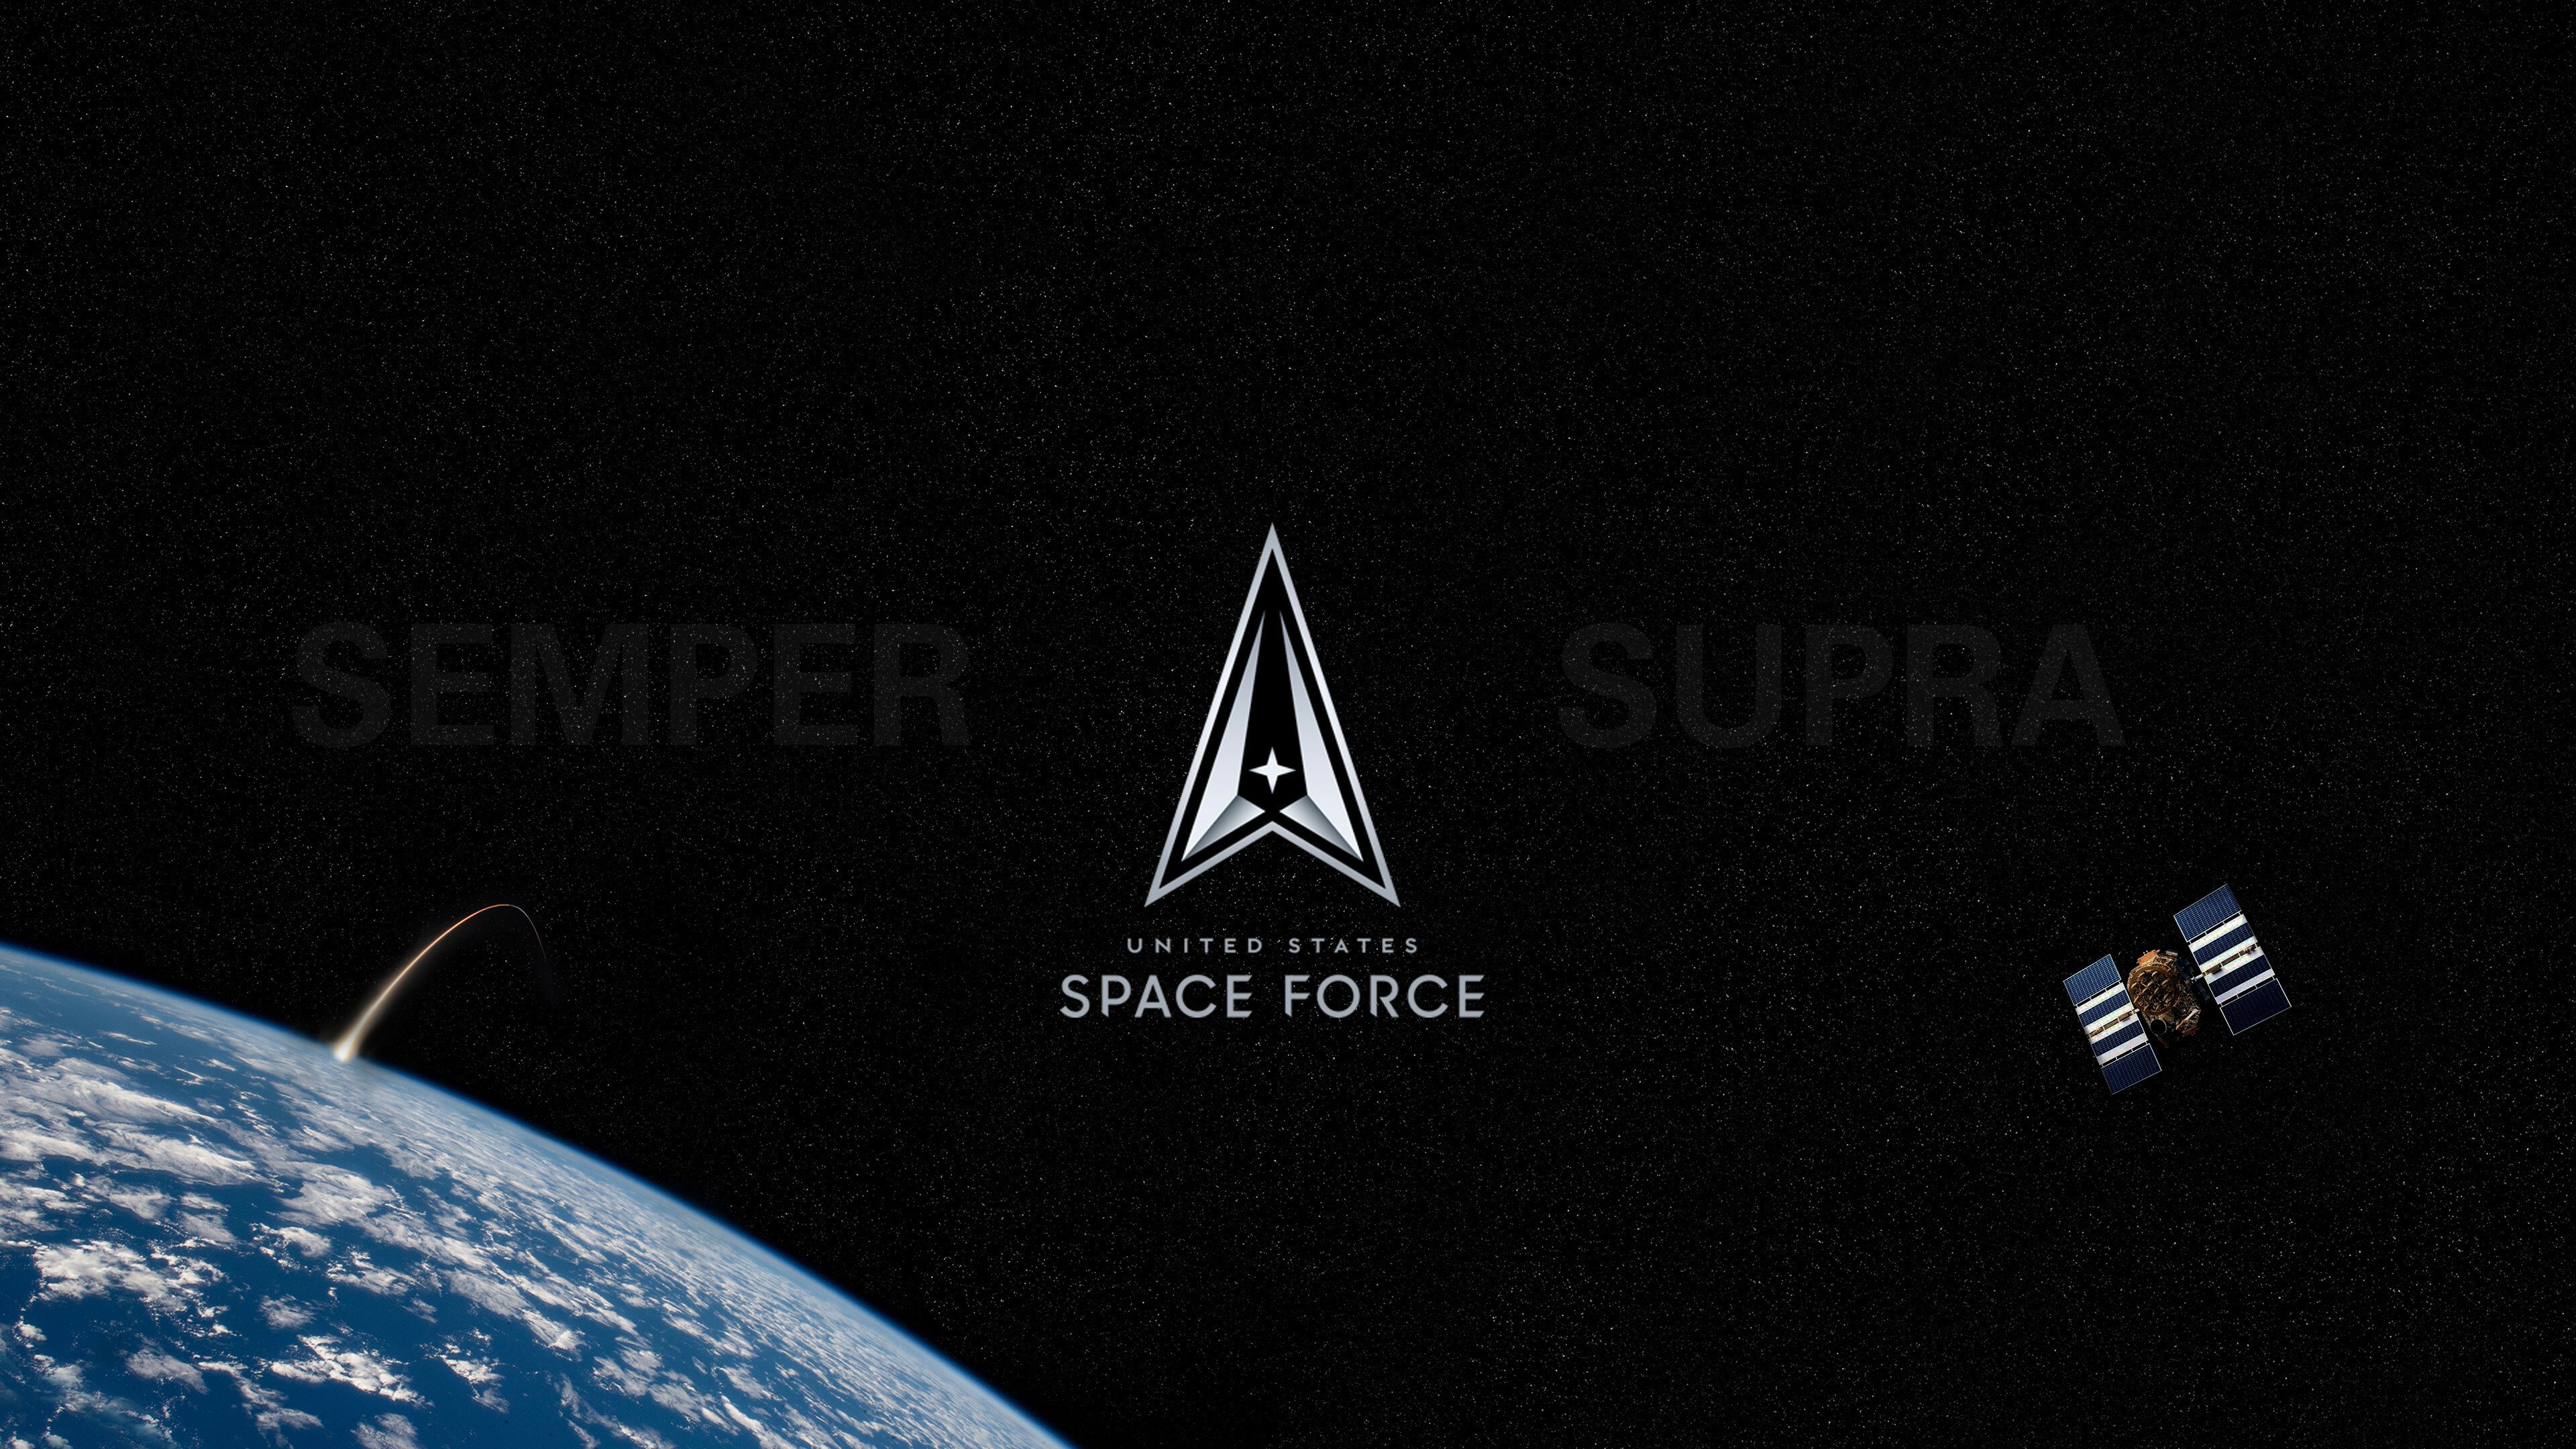 the space force logo over earth in illustration